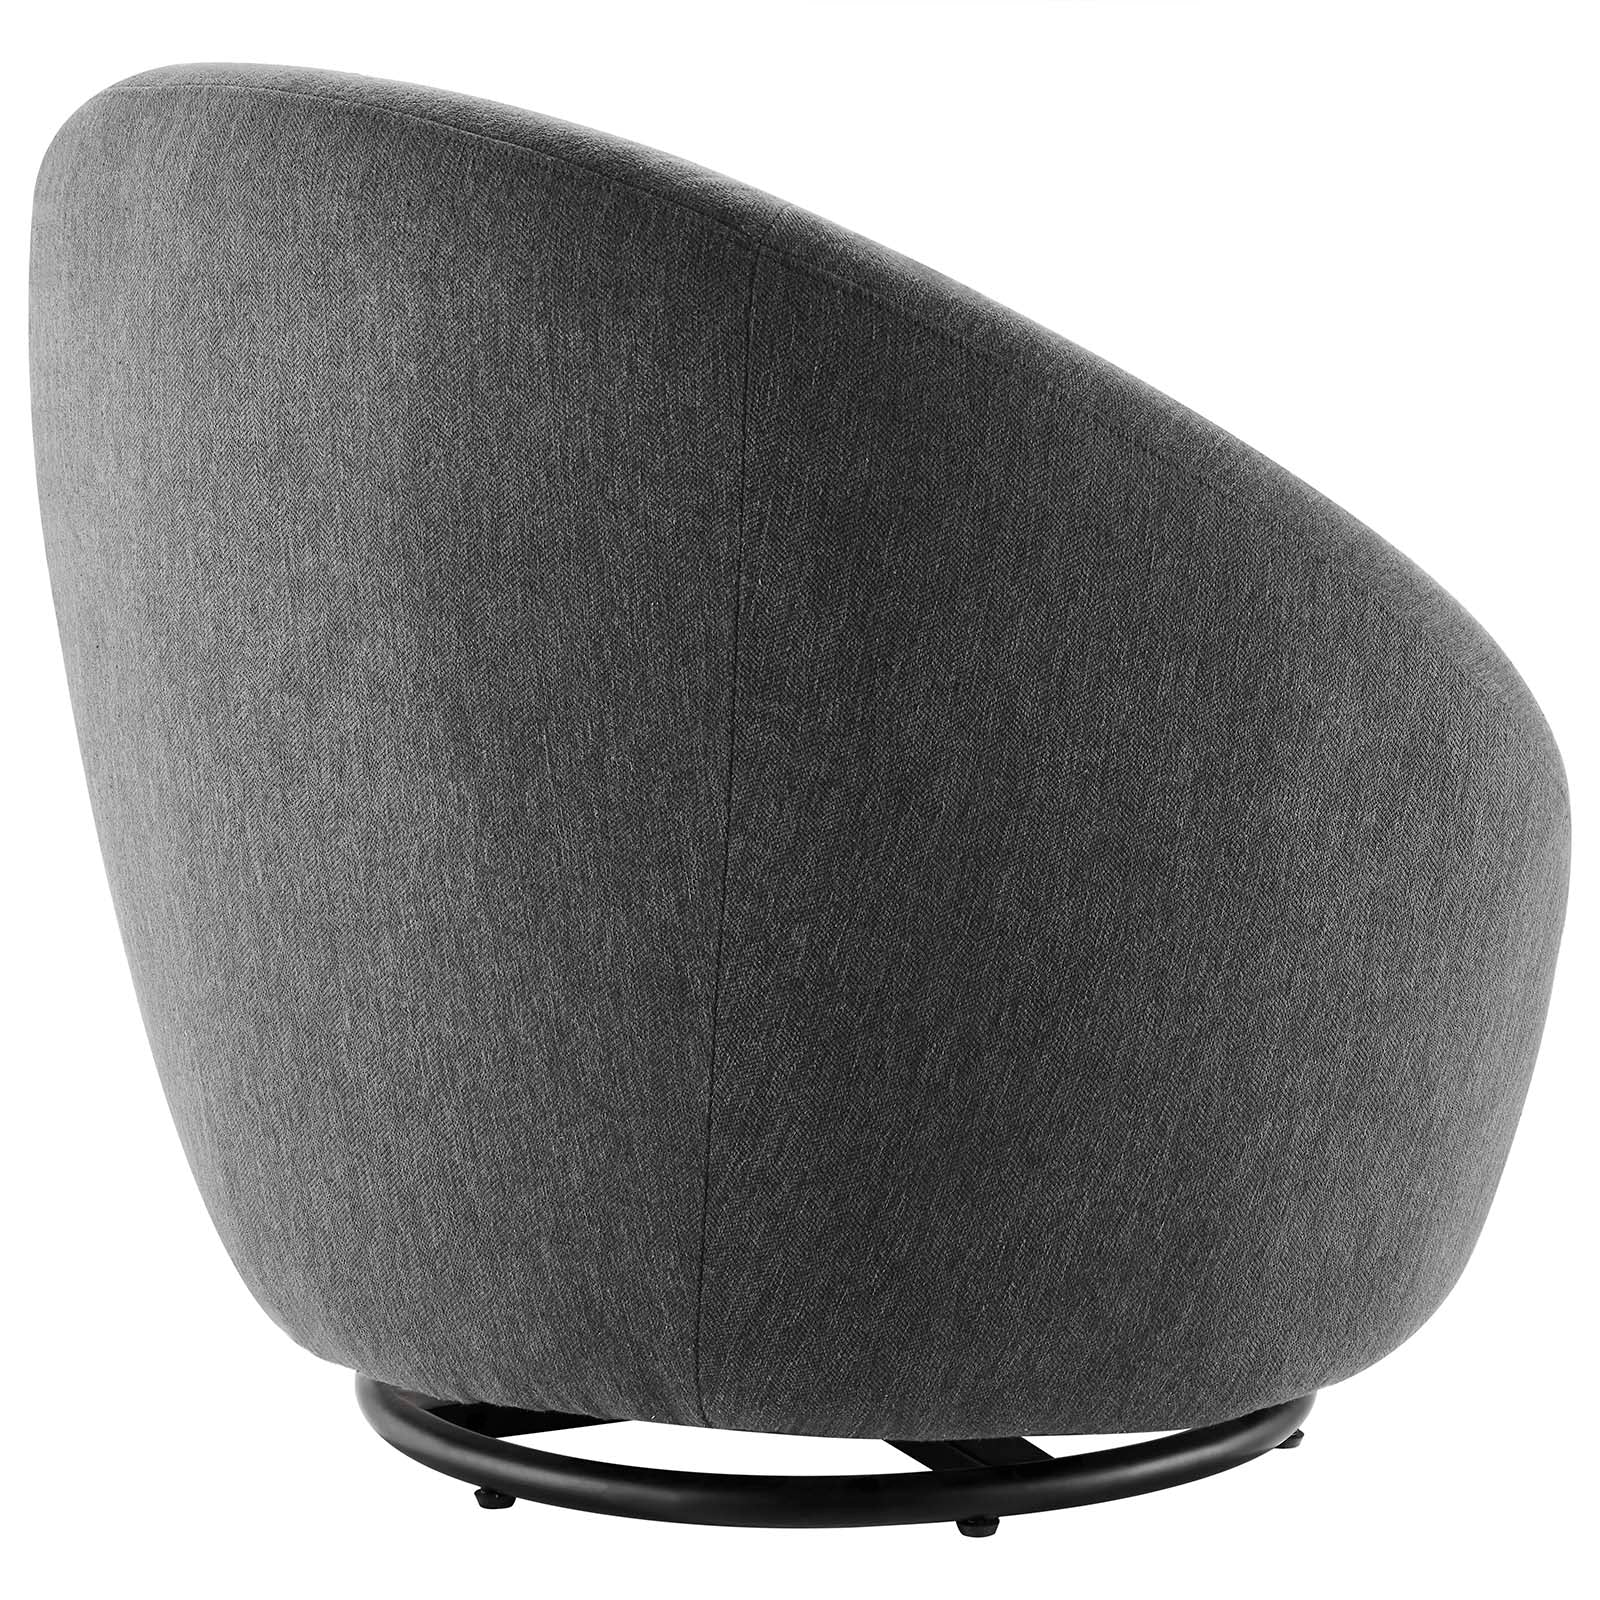 Buttercup Fabric Upholstered Swivel Chair - East Shore Modern Home Furnishings